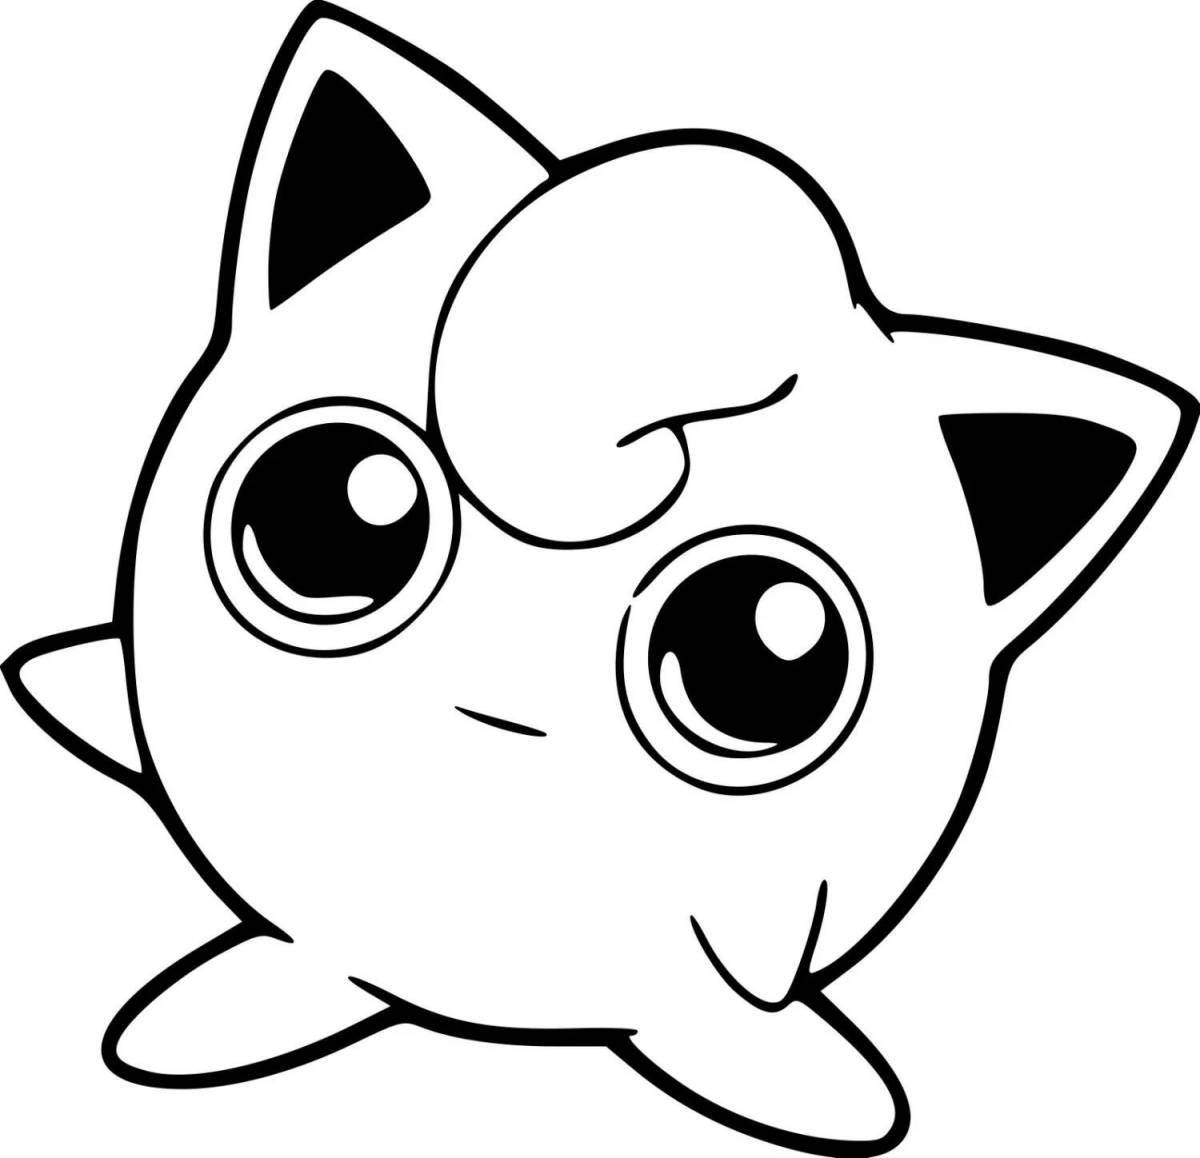 Jigglypuff colorful coloring page